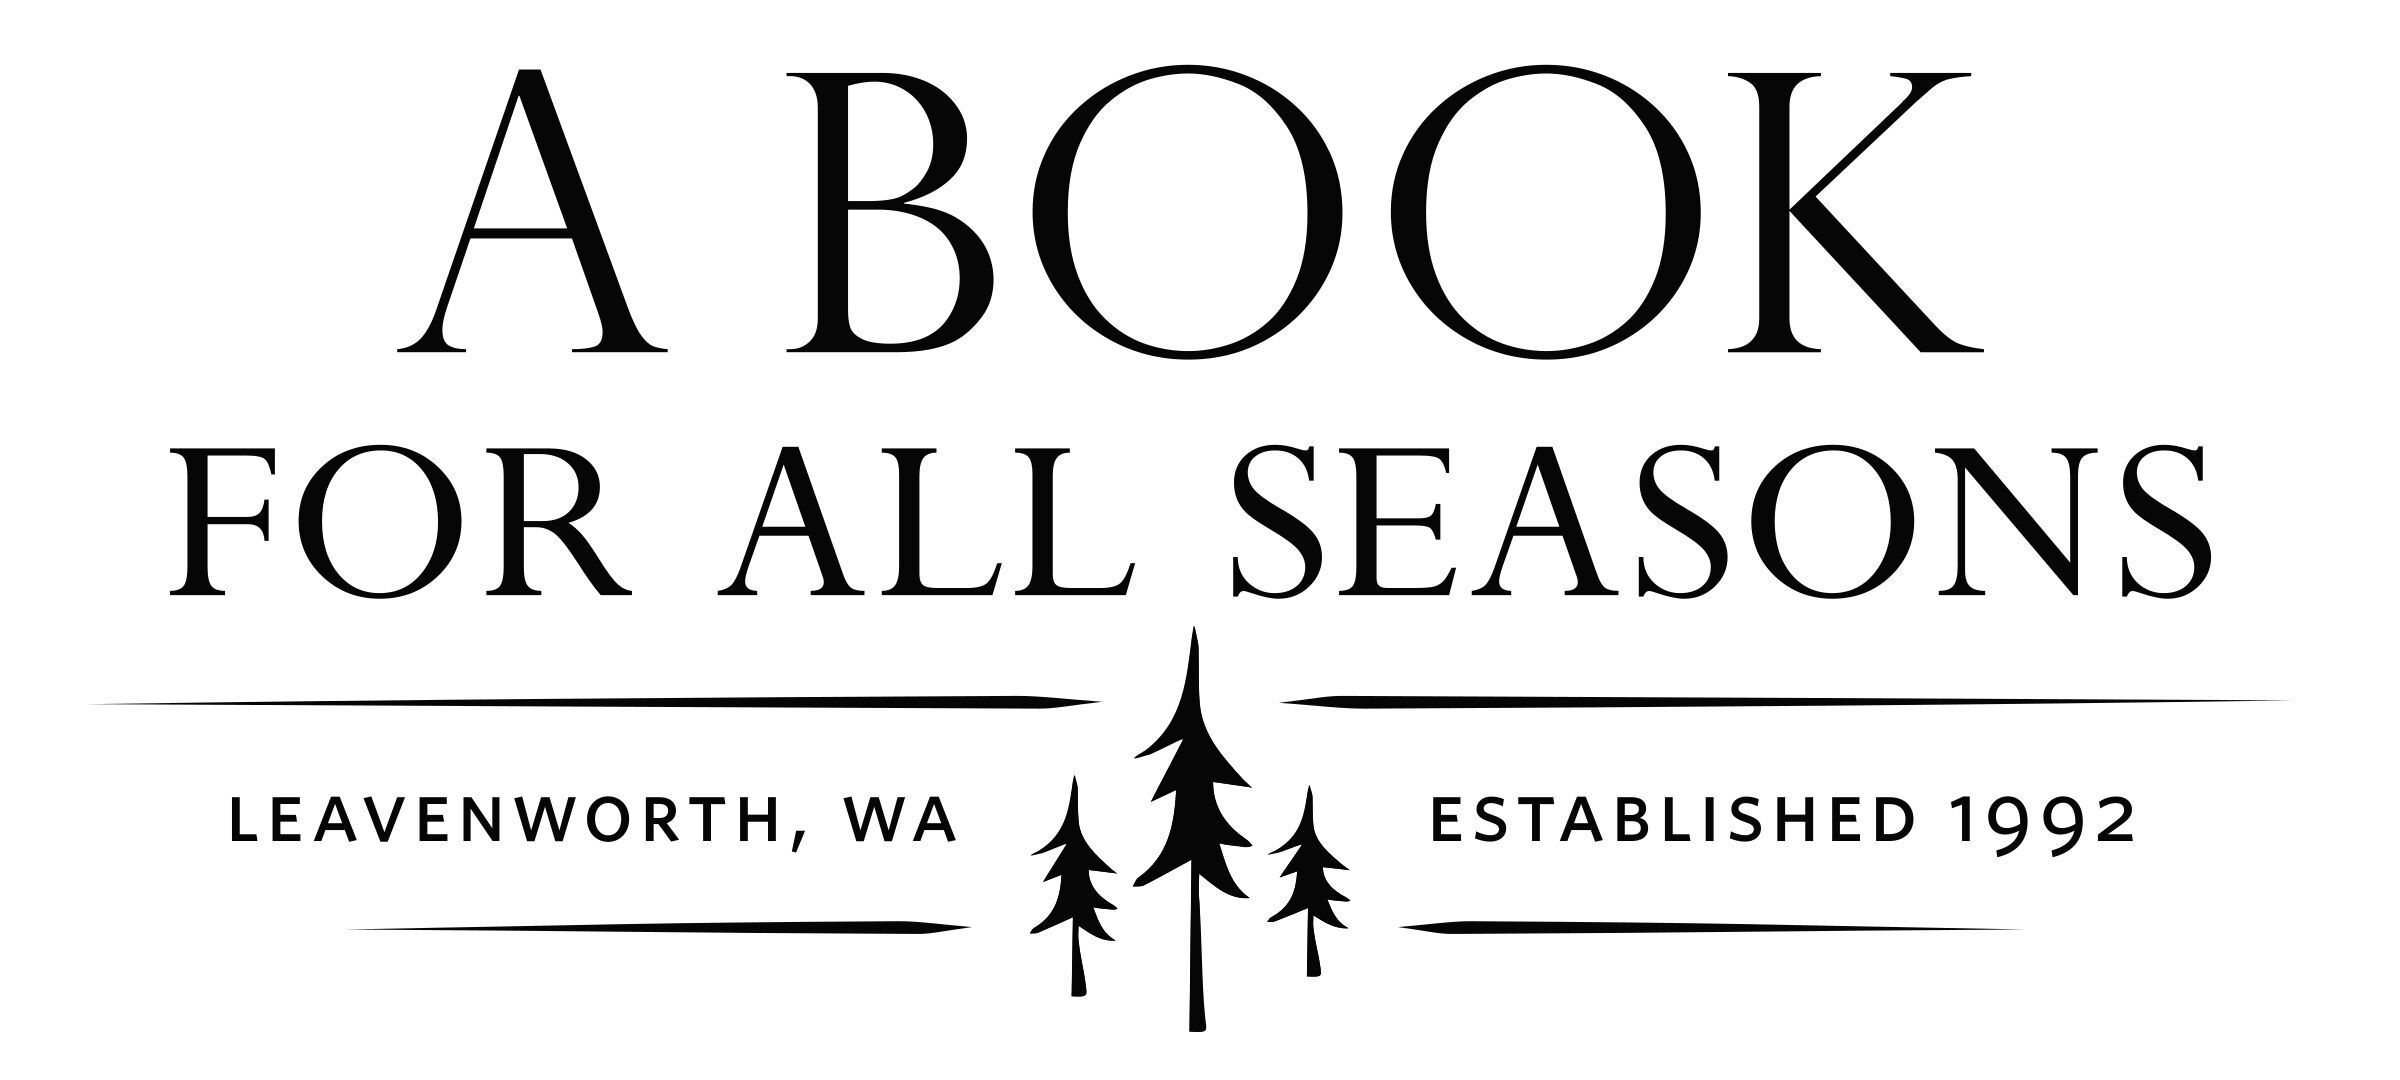 A Books For All Seasons